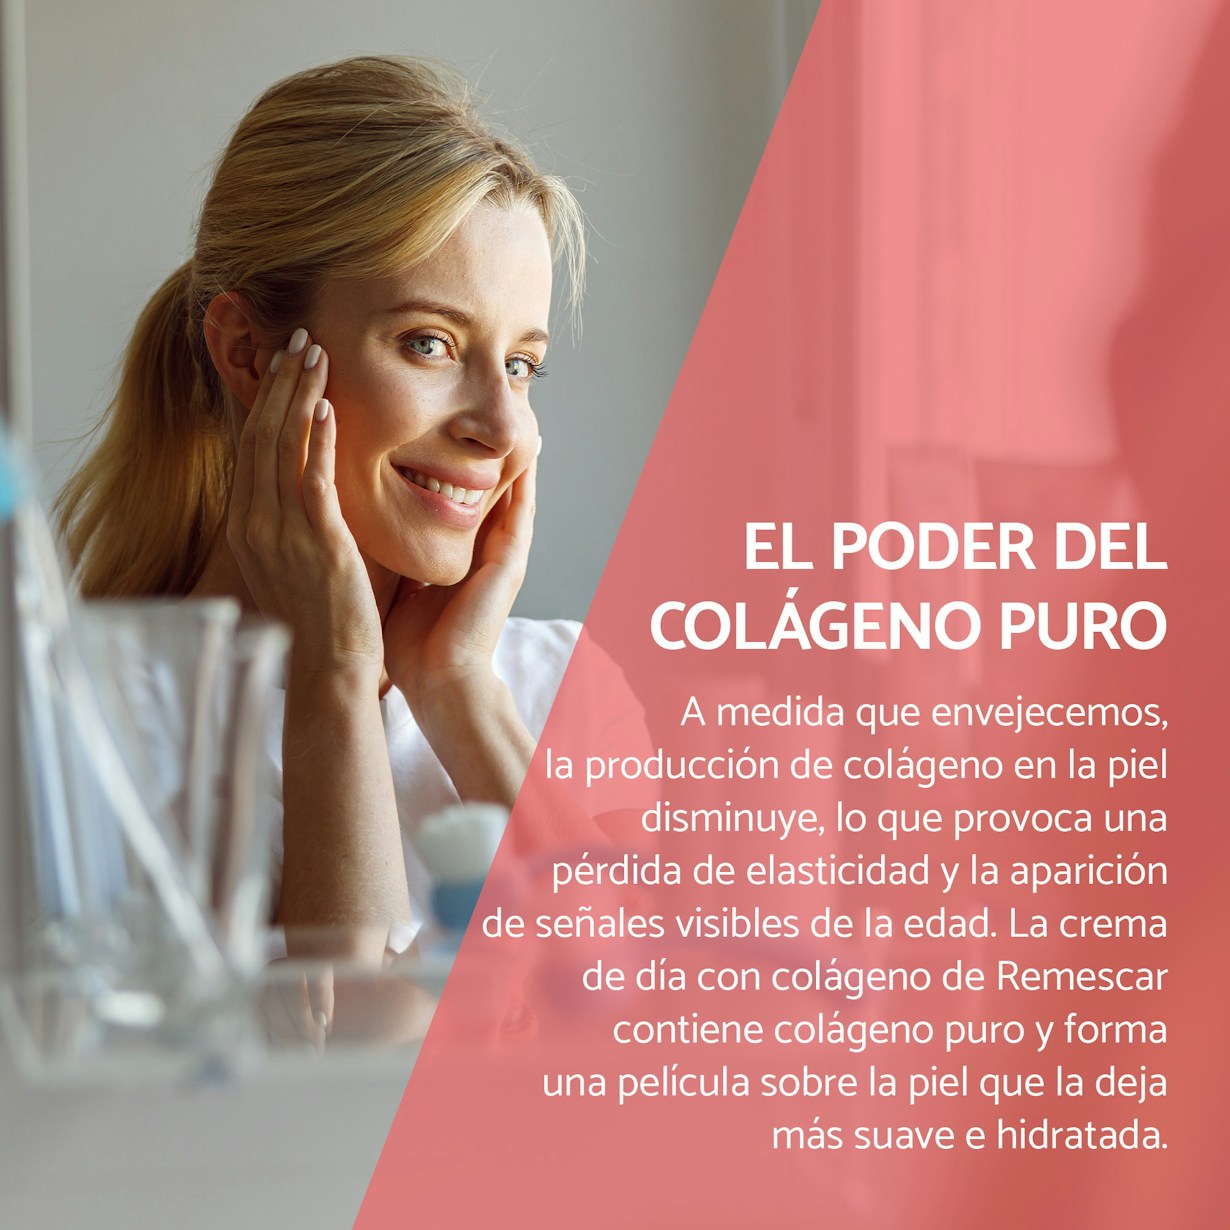 Remescar pdp pictures website and amazon 2000x2000px collagen day cream ES5